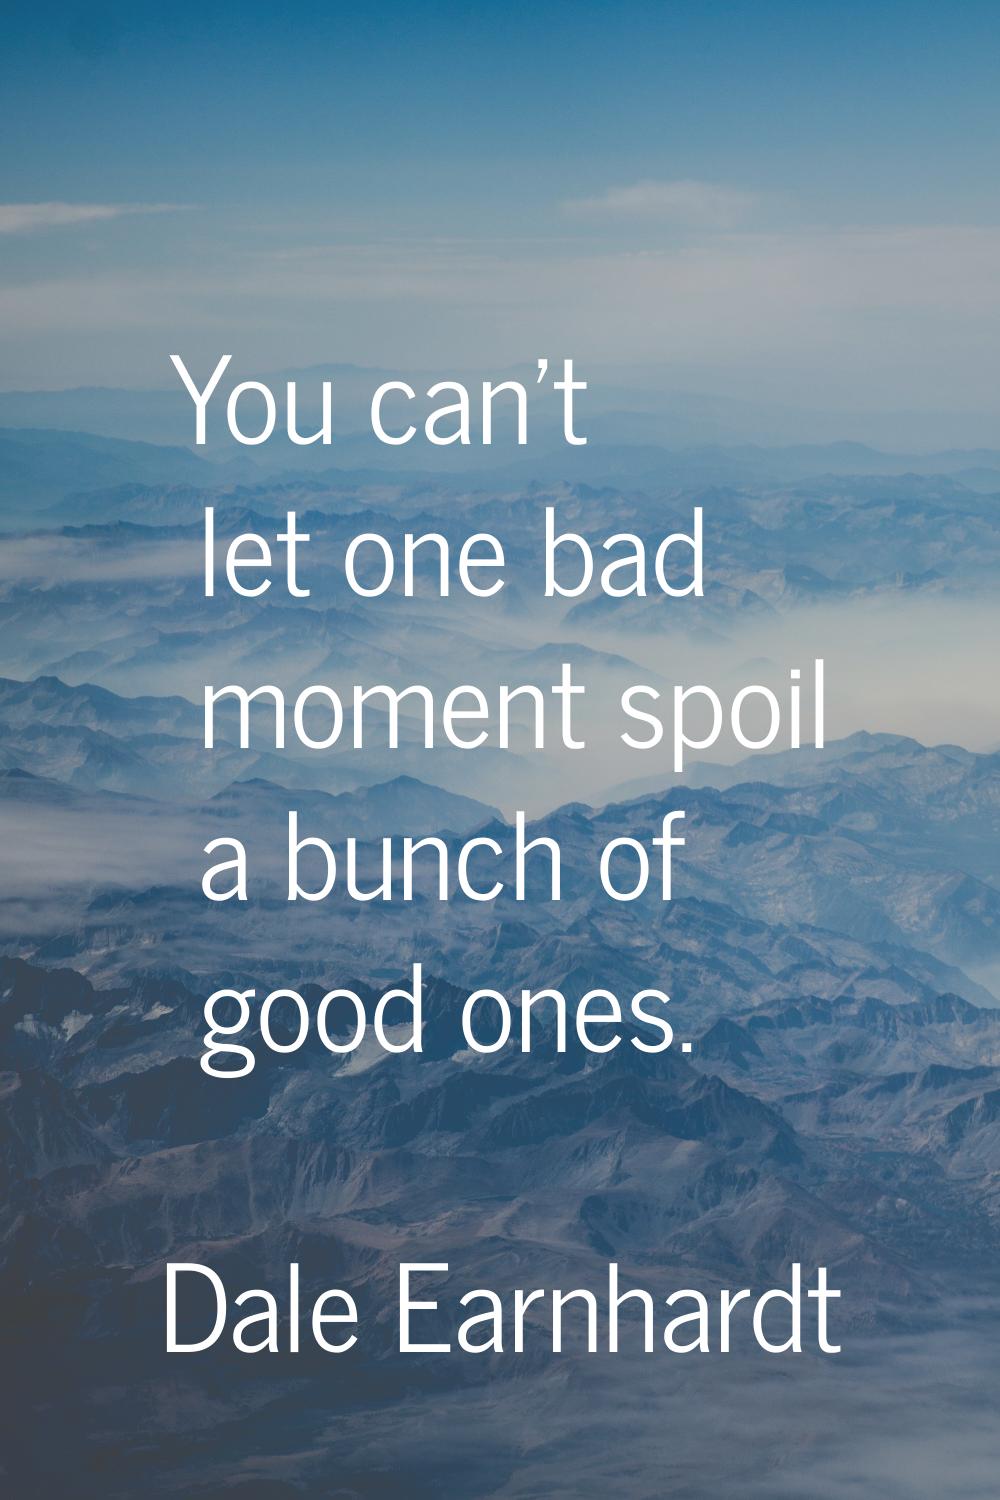 You can't let one bad moment spoil a bunch of good ones.